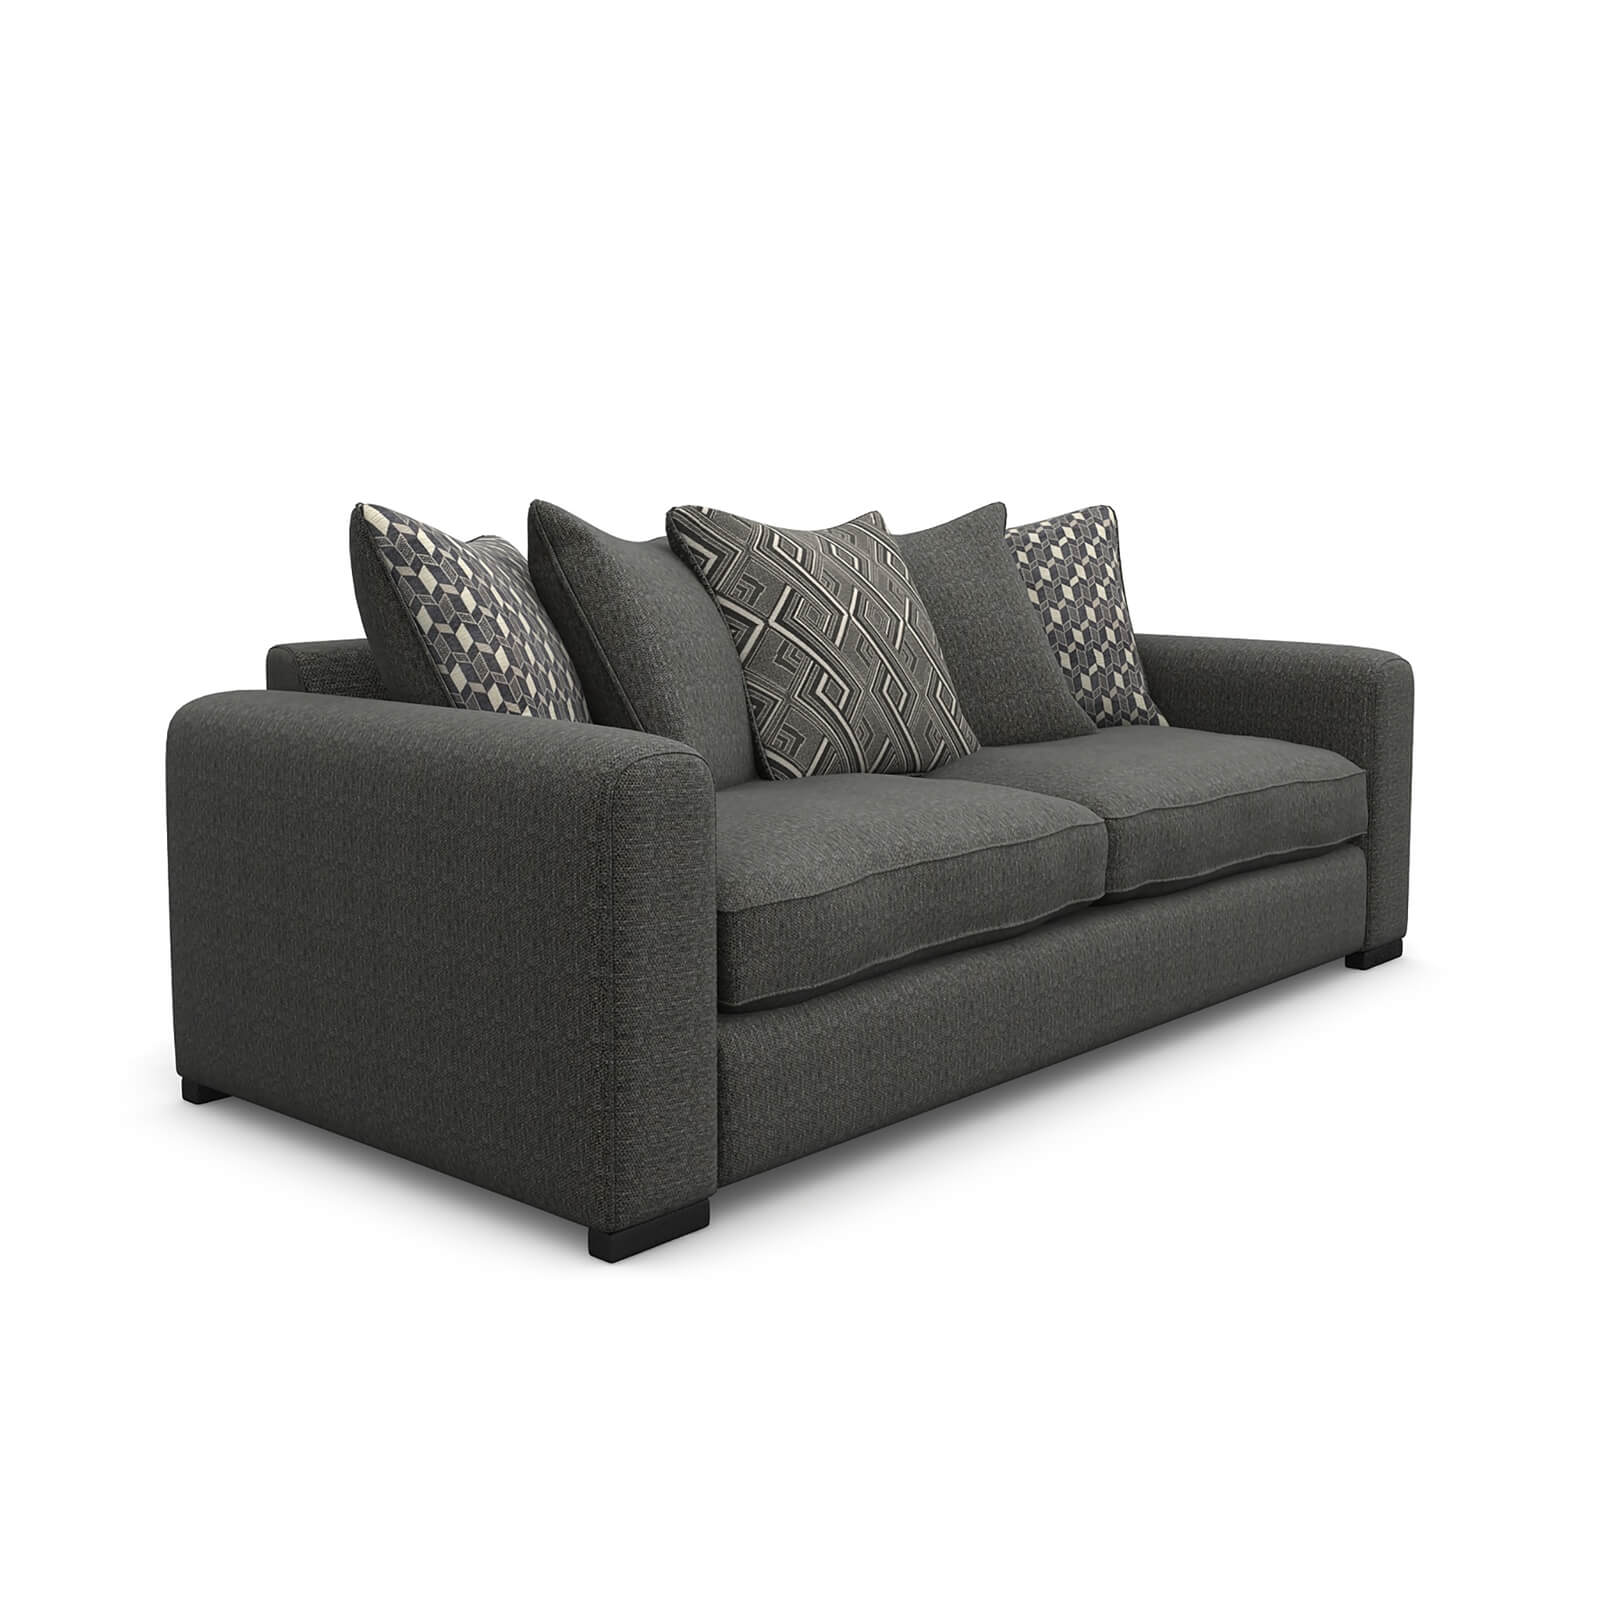 Lewis 3 Seater Sofa - Charcoal